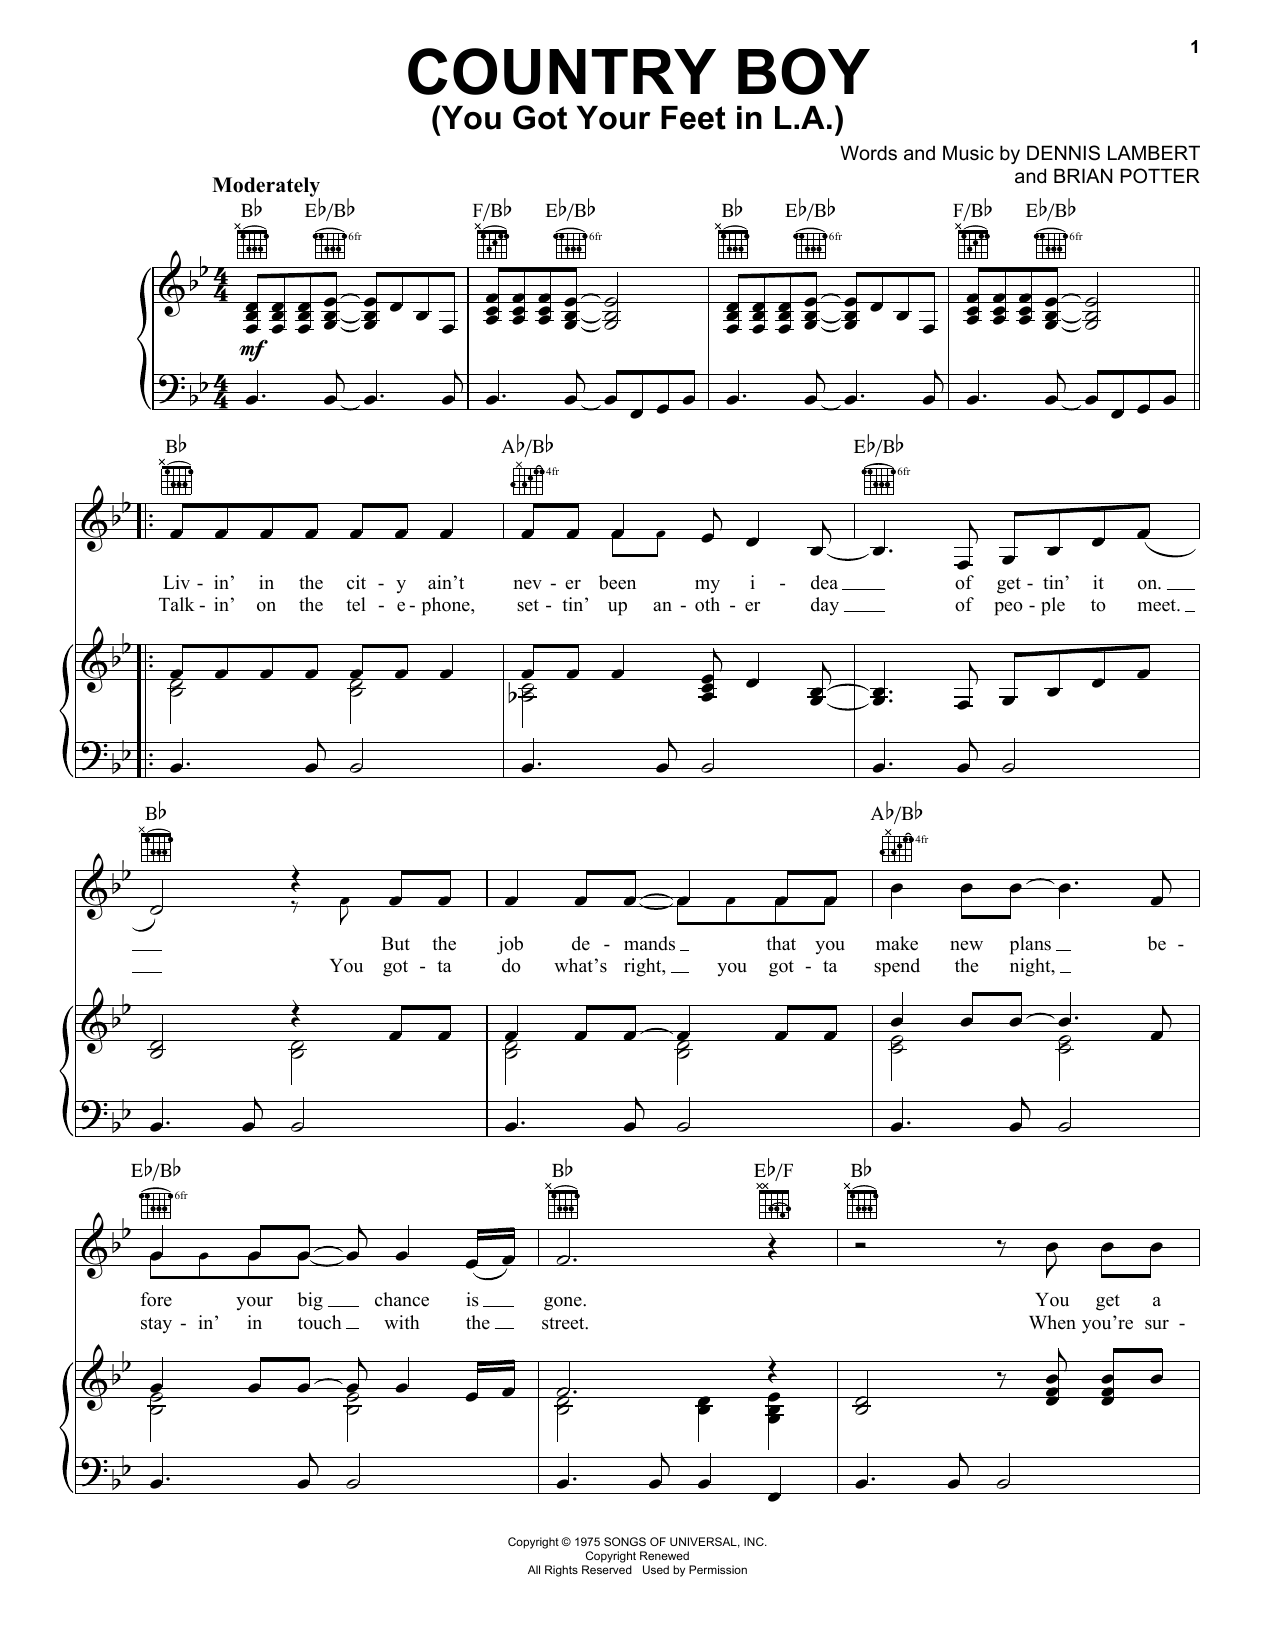 Download Glen Campbell Country Boy (You Got Your Feet In L.A.) Sheet Music